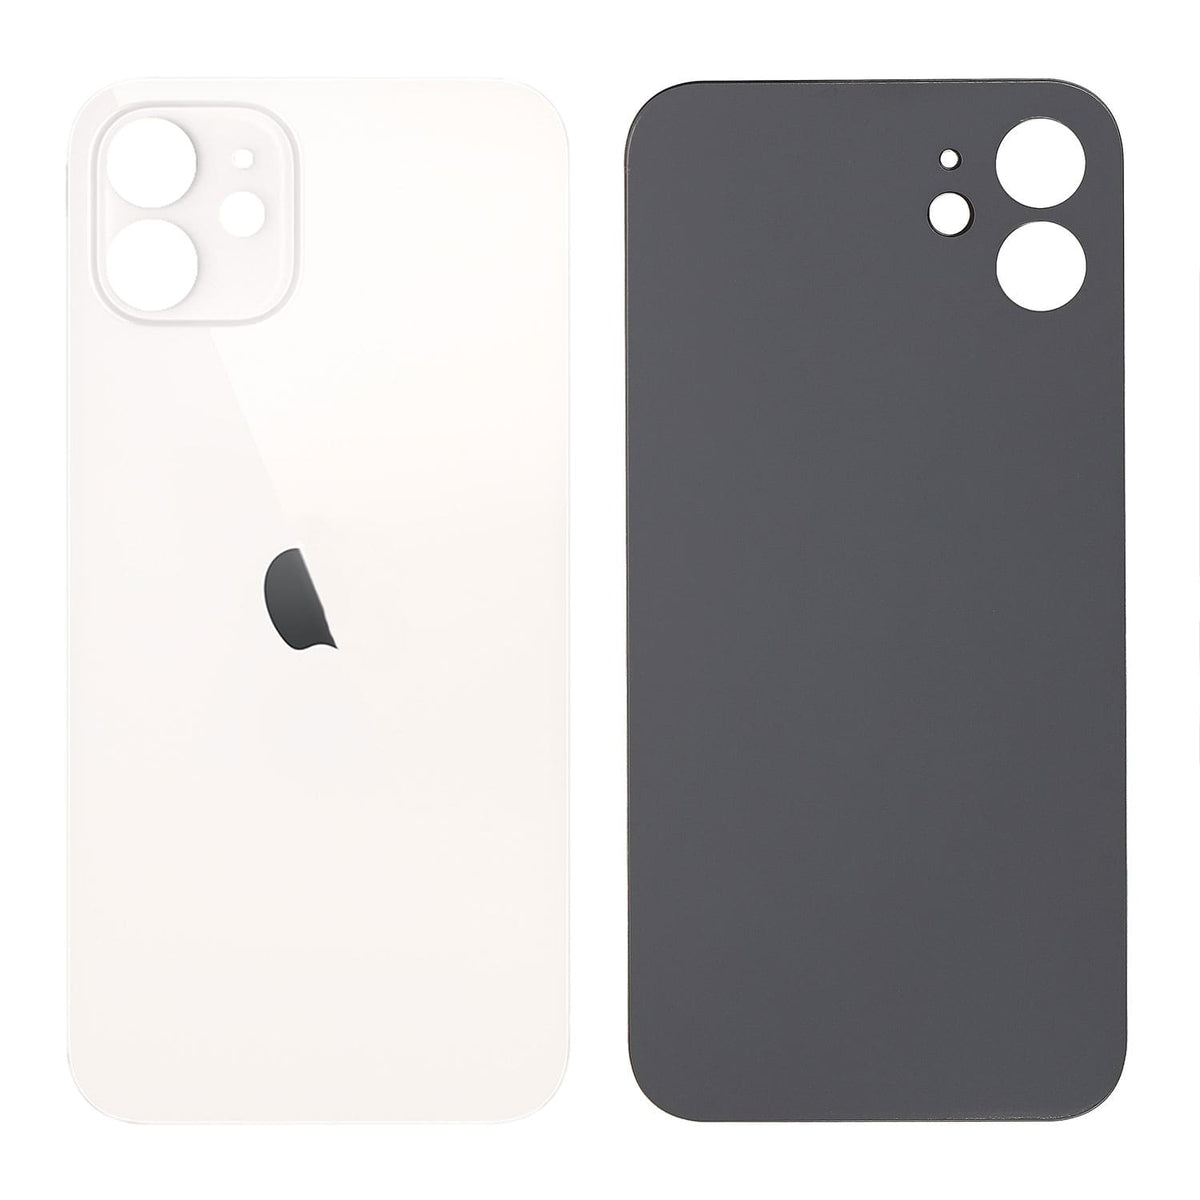 BACK COVER FOR IPHONE 12 MINI - WHITE